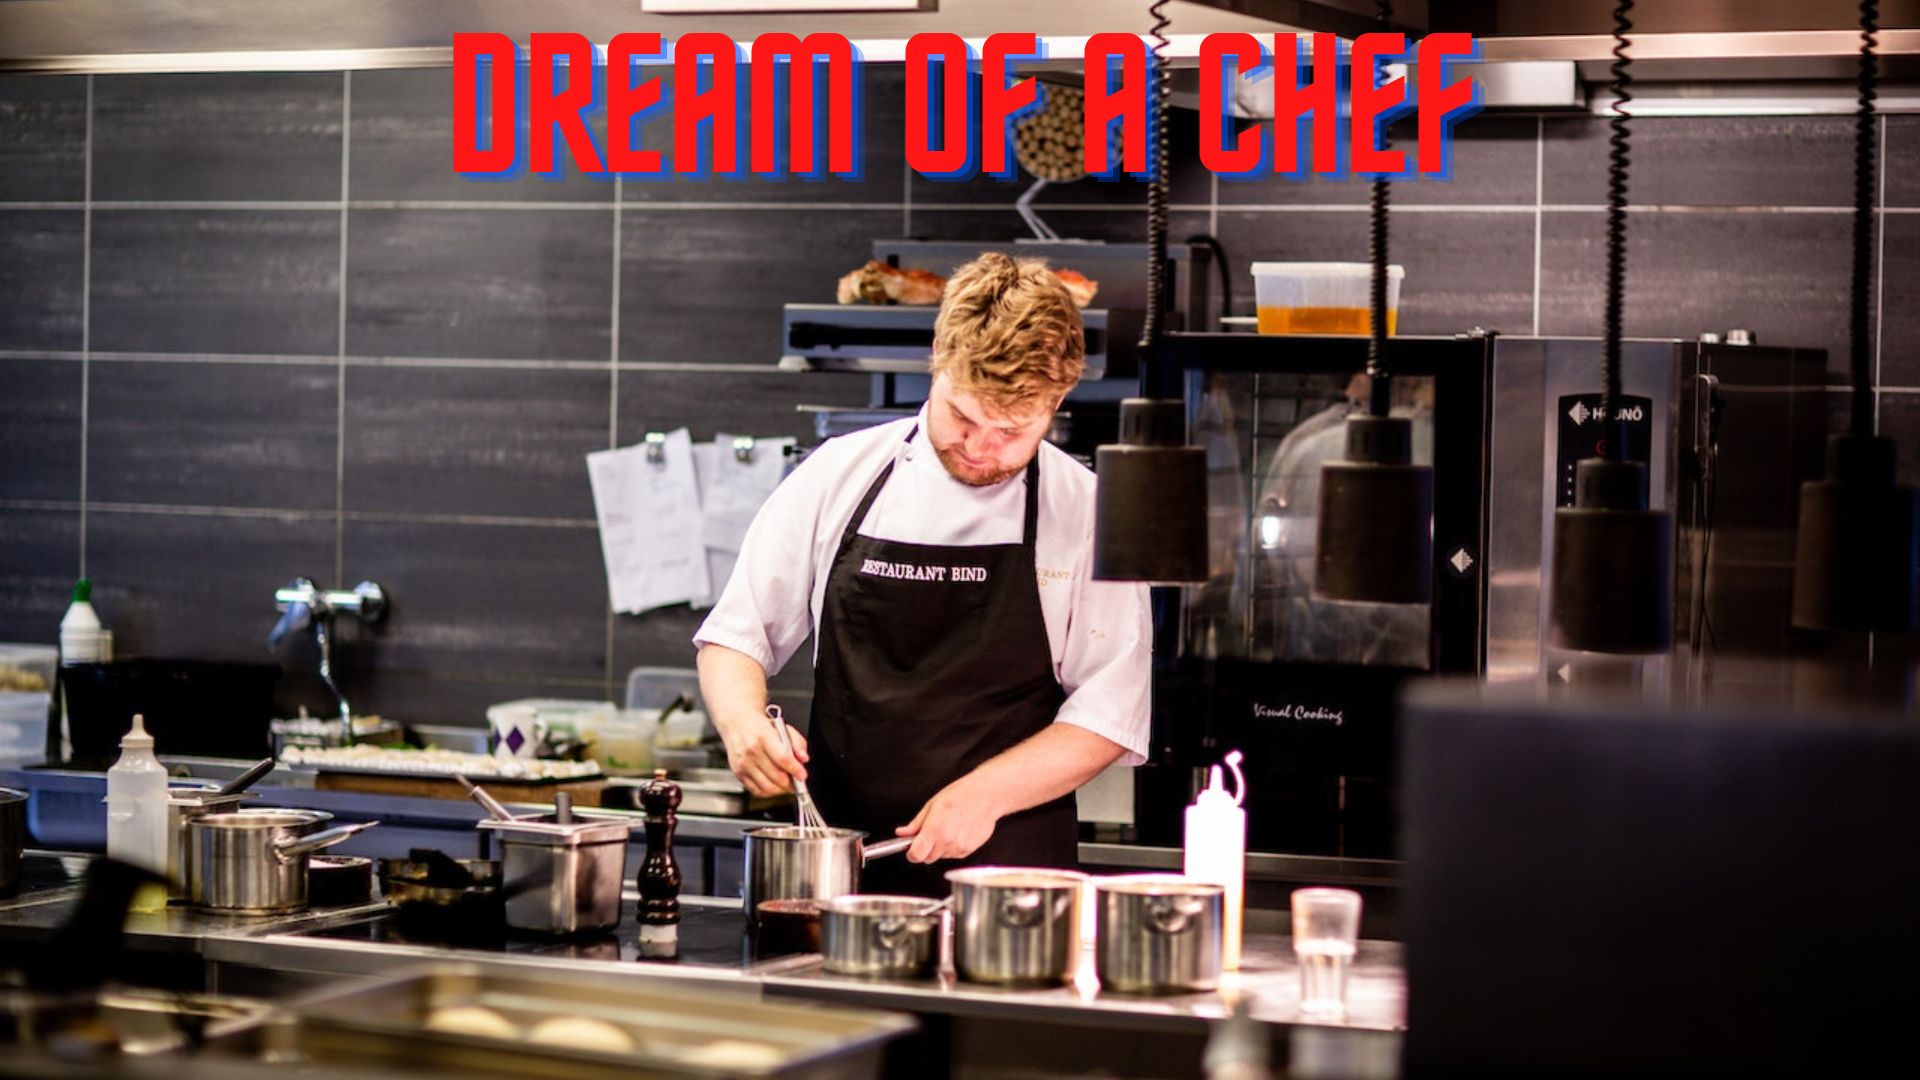 Dream Of A Chef - Indicates Great Abundance, Freedom And Happiness